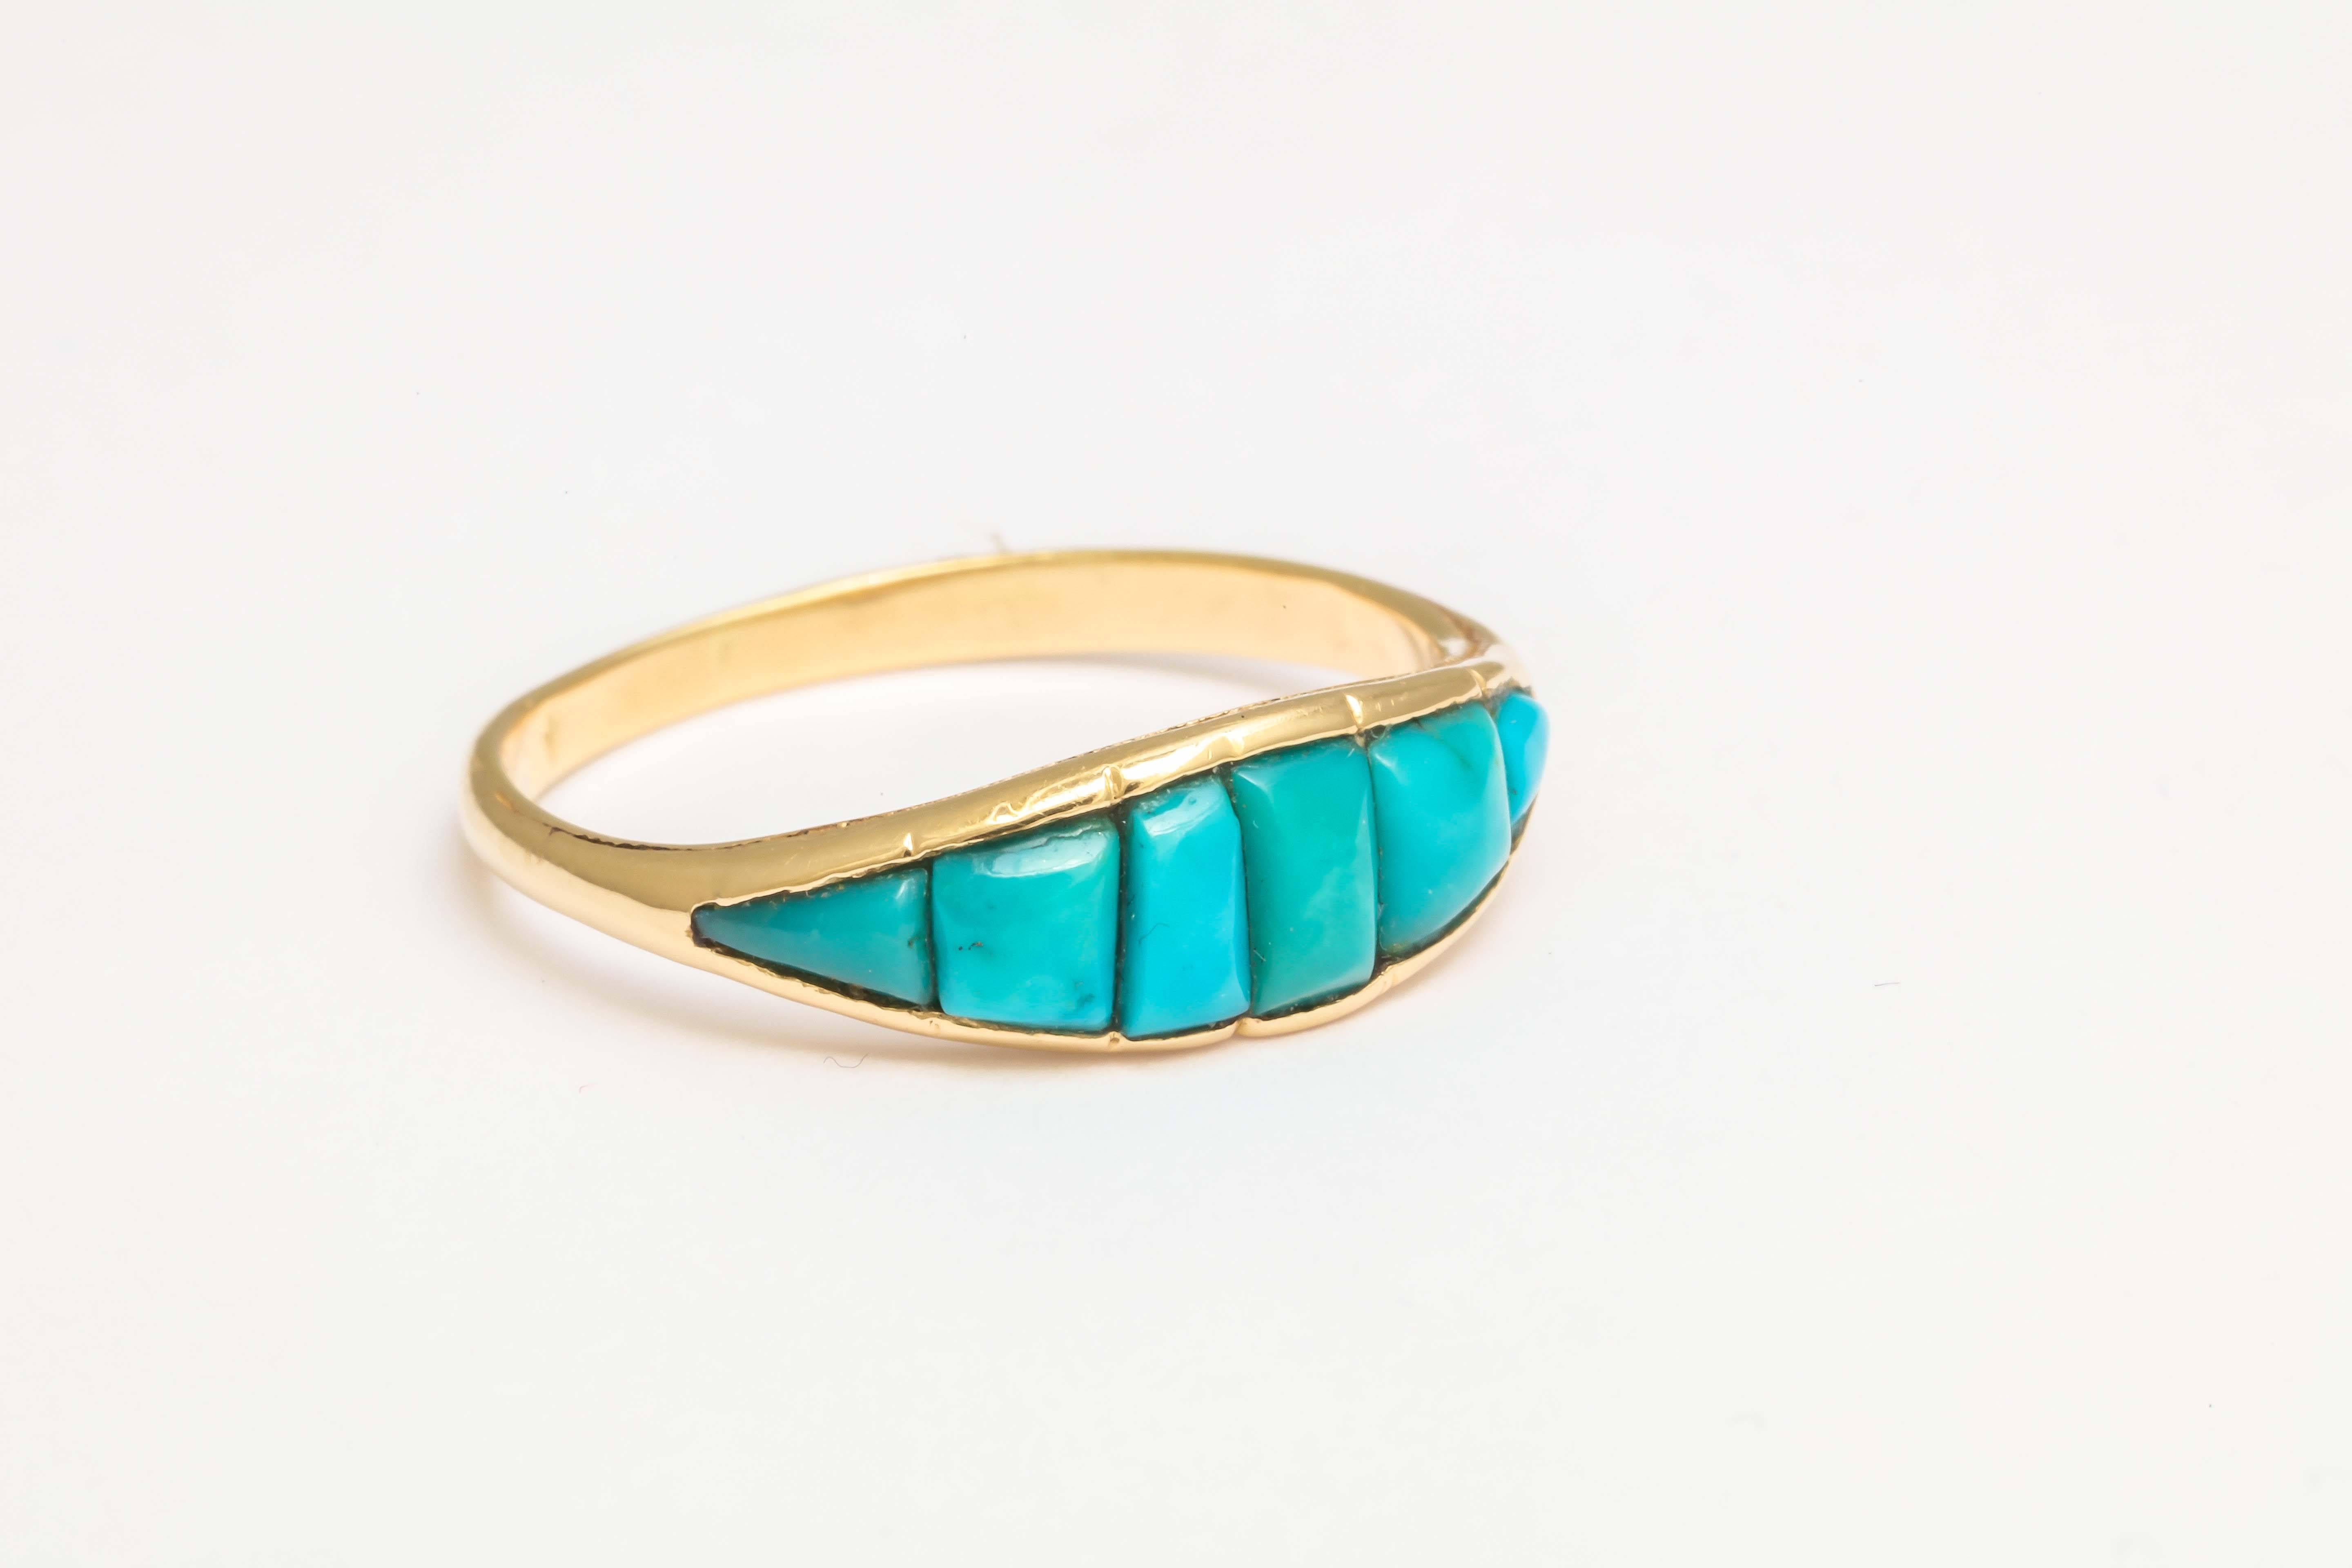 George V 1810s Antique Georgian Persian Turquoise Gold Ring